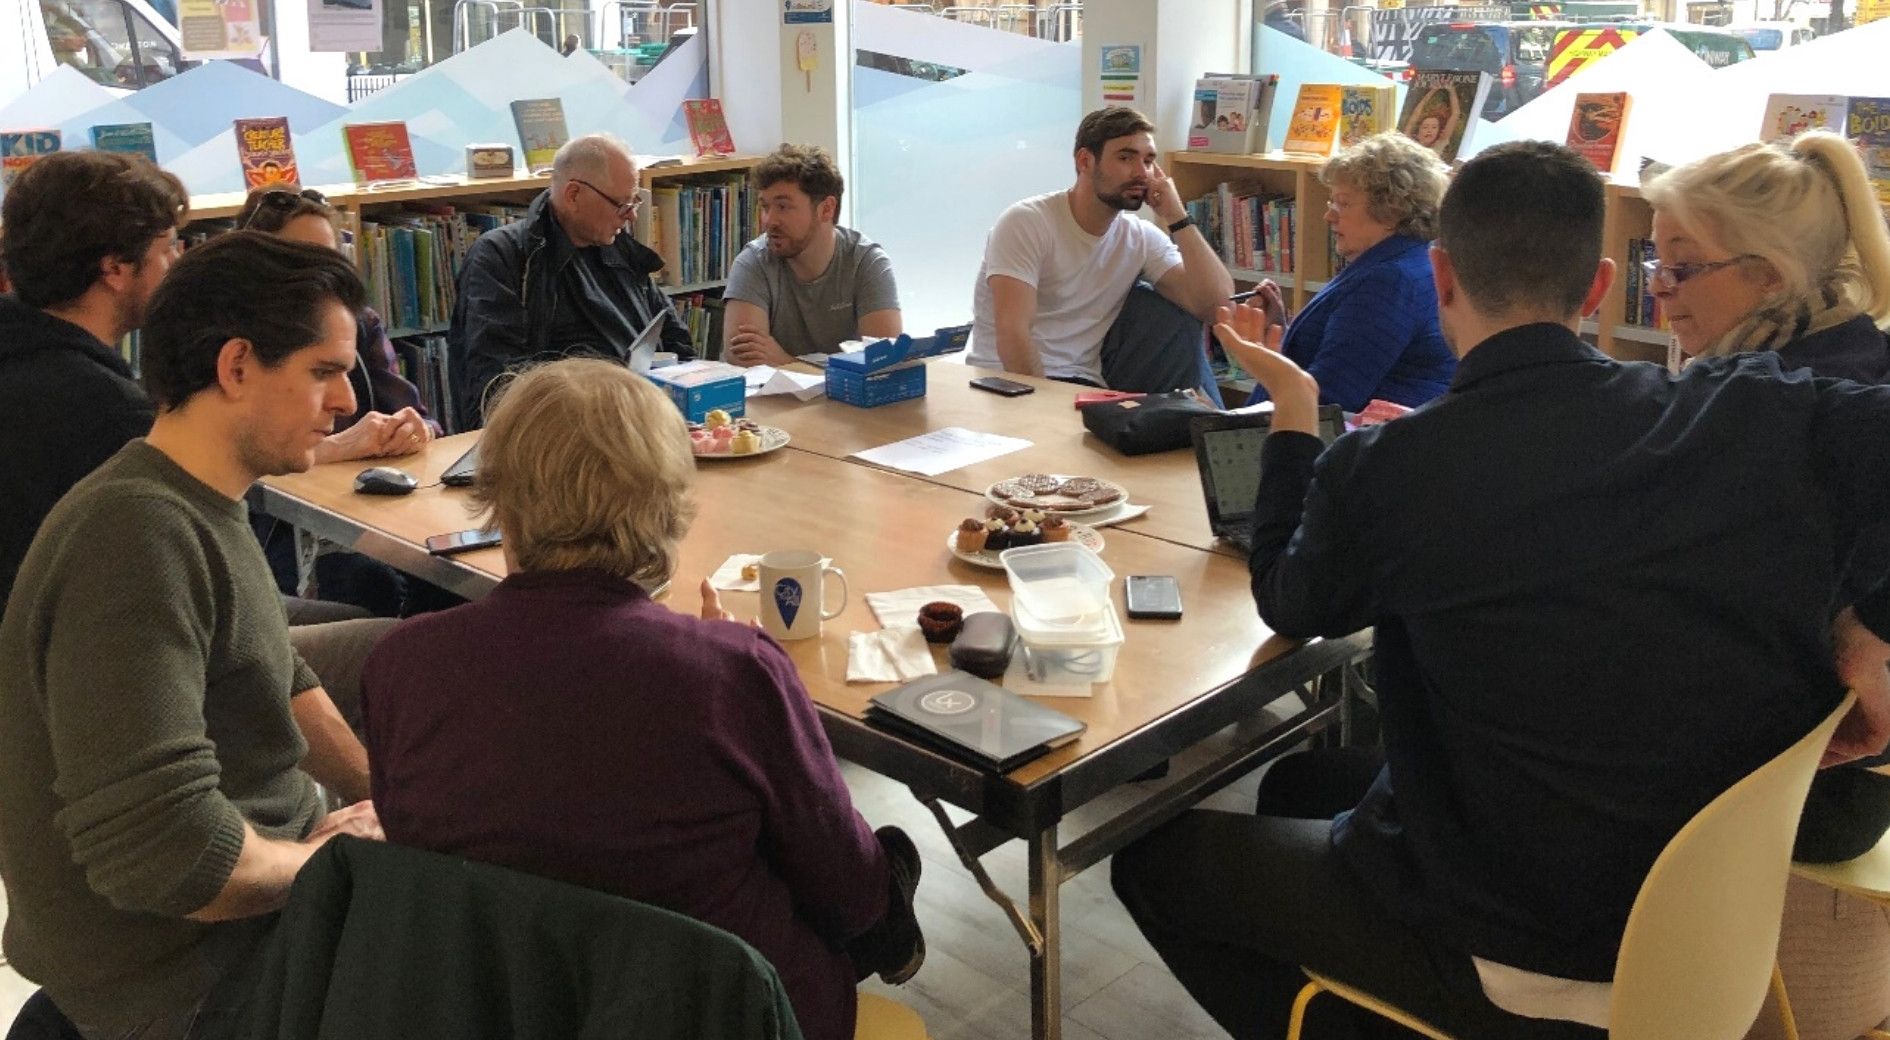 Ten adults seated in a children's library with desserts and snacks placed in front of them